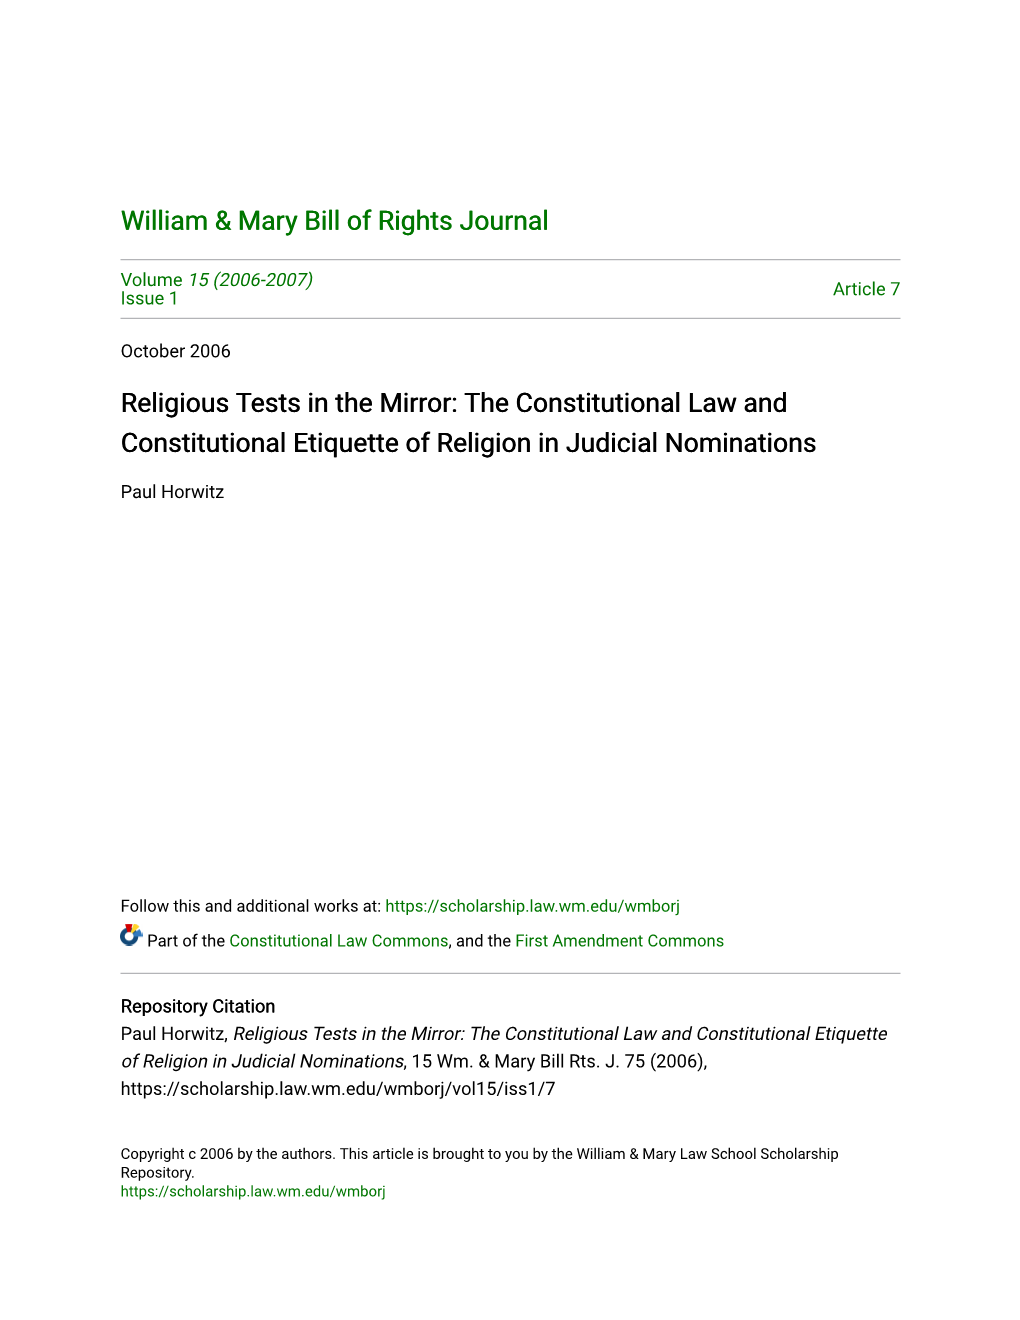 Religious Tests in the Mirror: the Constitutional Law and Constitutional Etiquette of Religion in Judicial Nominations